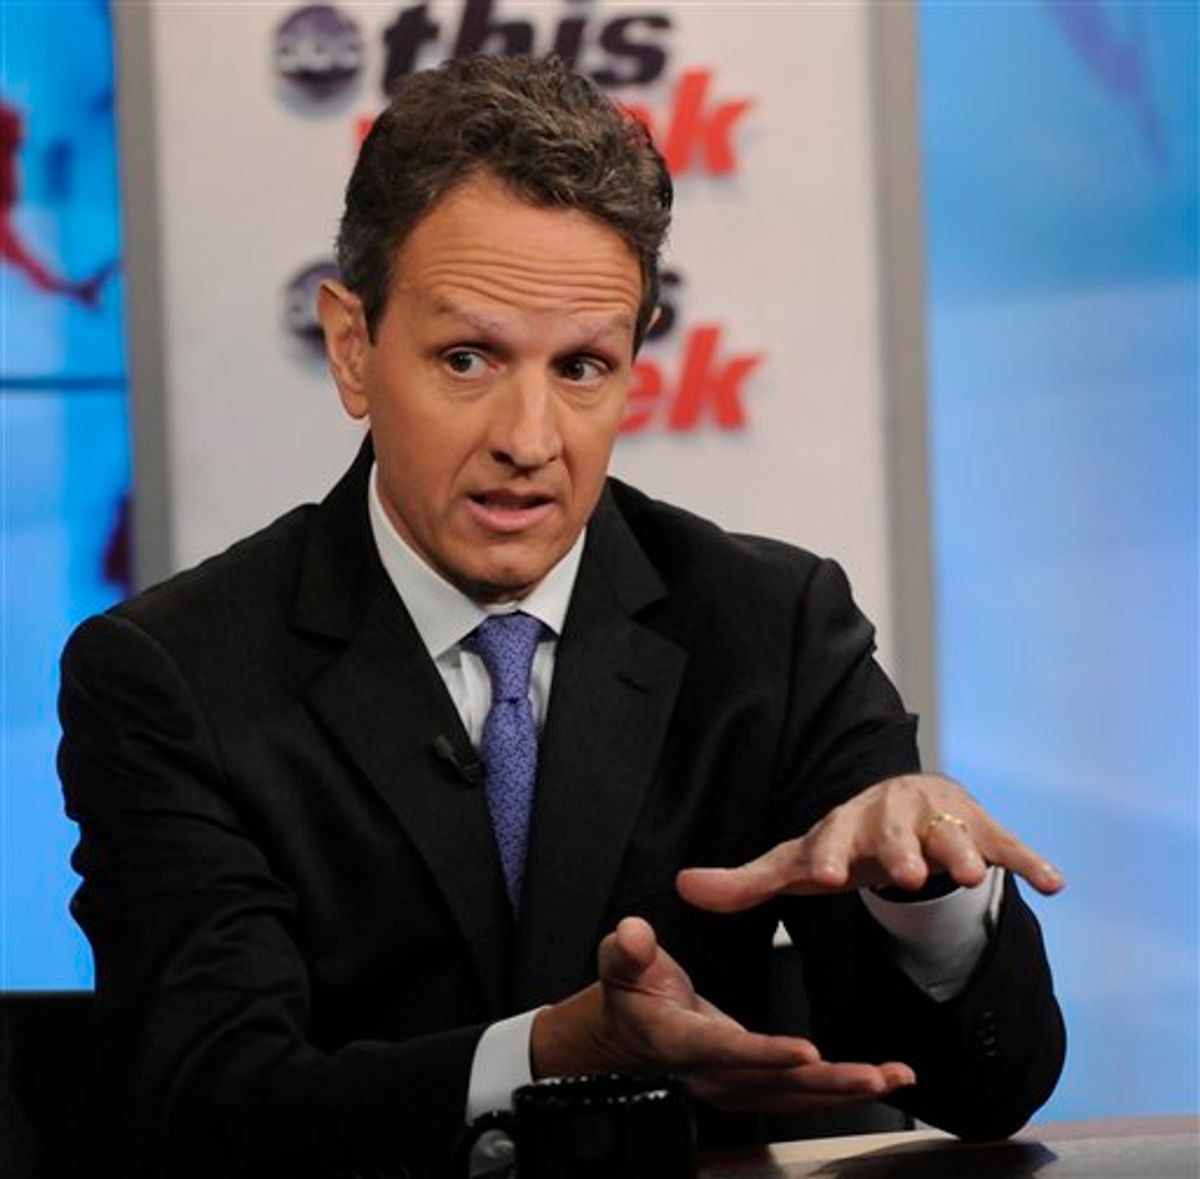 In this photo provided by ABC News U.S. Treasury Secretary Timothy Geithner talks about the debt-ceiling on ABC's "This Week" Sunday, July 24, 2011, in Washington. Congressional leaders in Washington planned to work on a fiercely hot Sunday to try to reach a bipartisan accord to avert a debt-ceiling crisis on Aug. 2. (AP Photo/ABC, Fred Watkins) (AP)